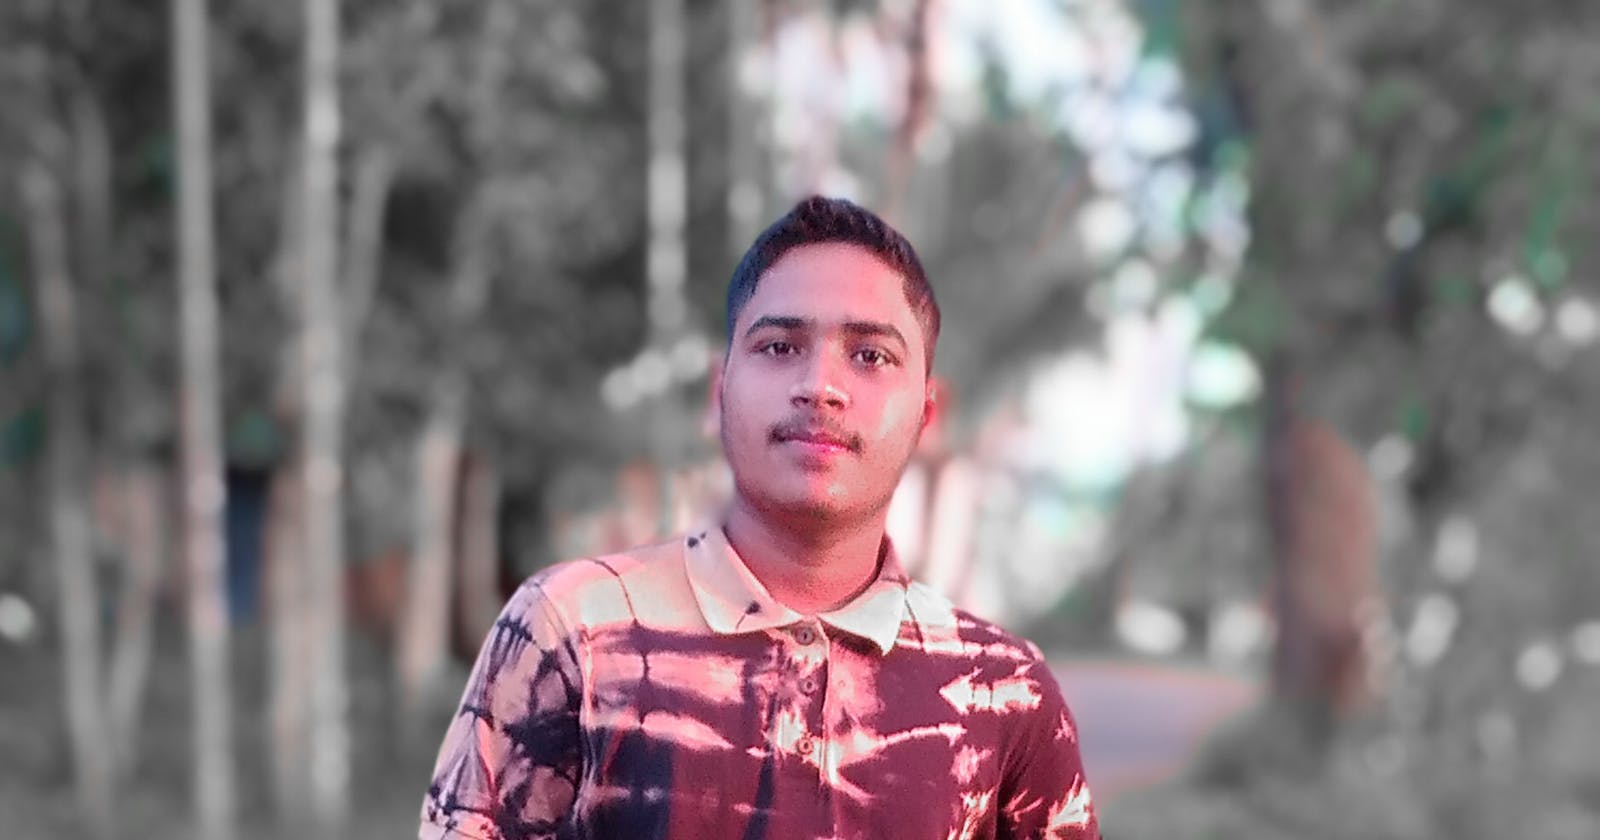 SHAMIM CHOIYAL is an Bangladeshi musical artist, composer who has already verified as (OAC) YouTube official artist channel & largest music platform o